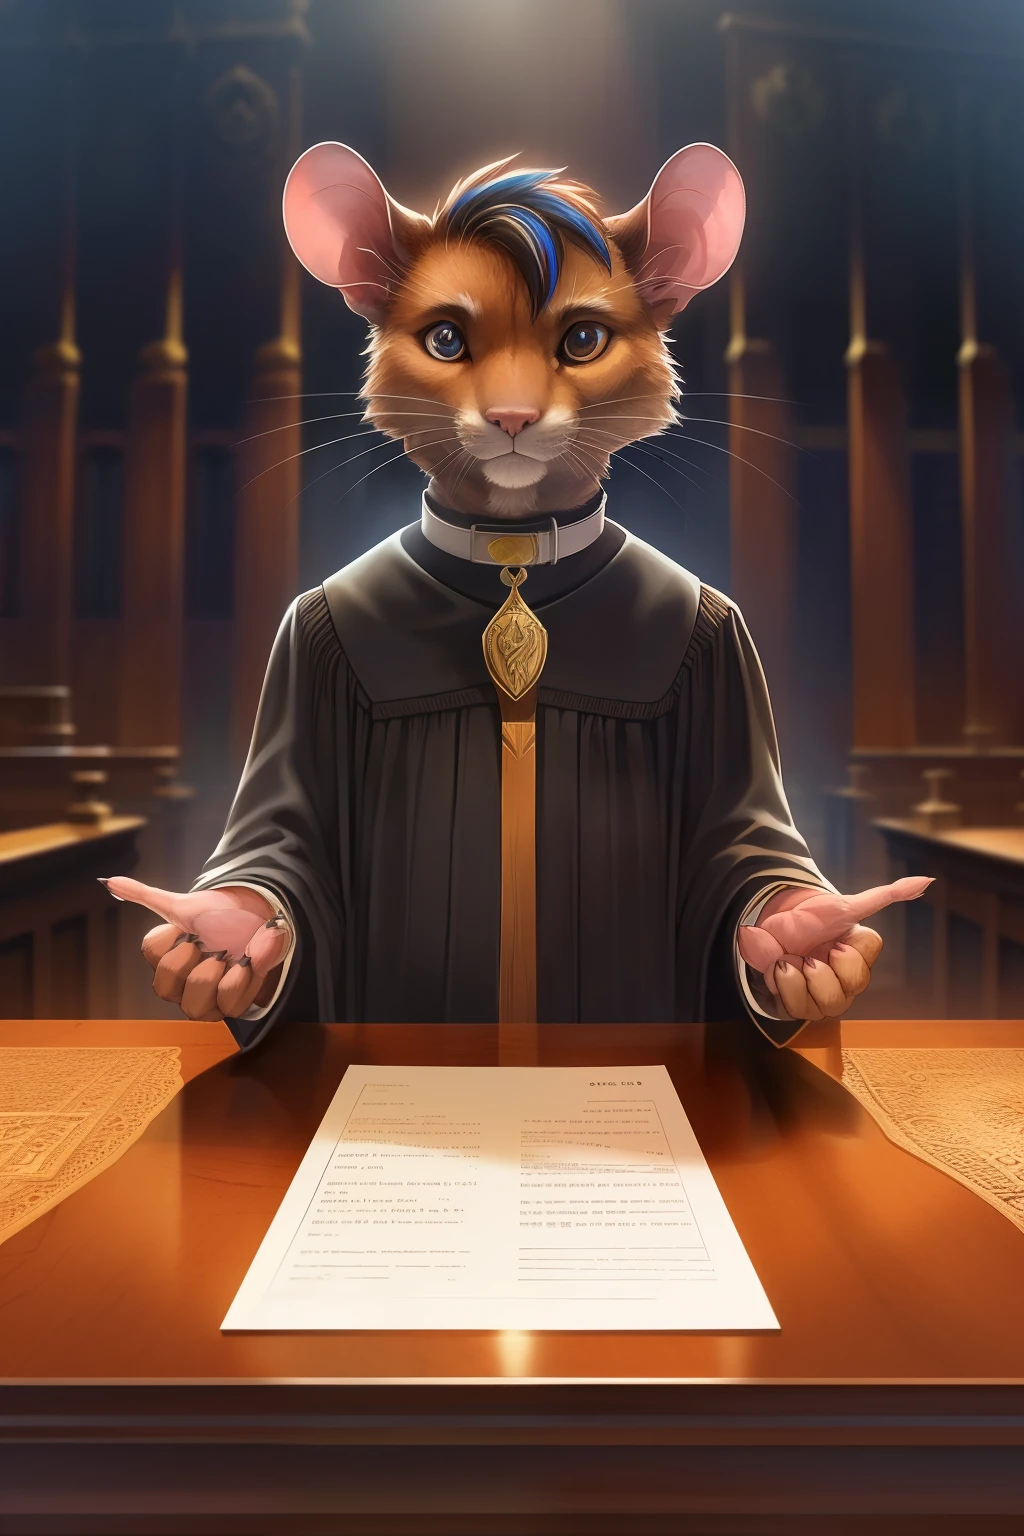 Solo, male, rat, black robe, im courtroom, ((evocative lighting highlighting the rat's features)), ((detailed fur texture and highlights on the robe)), ((realistic proportions of the rat, including whiskers and pointed snout)), ((standing, exuding confidence and gravity in the courtroom setting)), (_ Looking directly at the viewer with sharp, intelligent eyes, sometimes narrowed in concentration _), brown fur, white collar, quills running along the back, determined expression, judge's gavel on the table beside him, legal documents spread before him, (_ intricately drawn textures and folds on the documents _), absent-minded twitching of a paw,